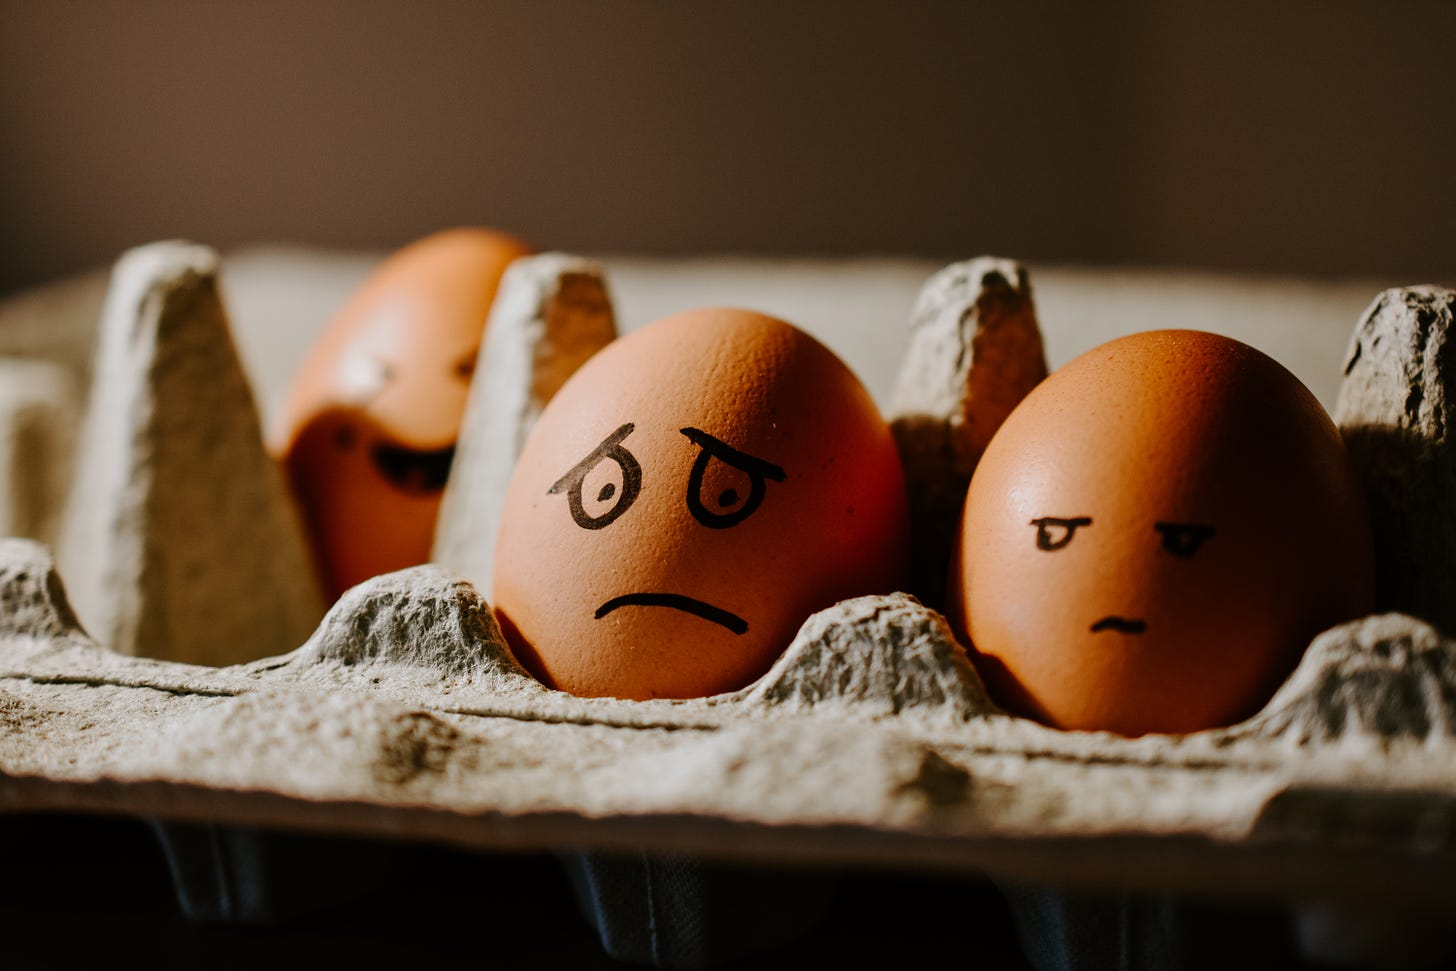 3 brown eggs in a carton with different faces drawn on: happy, worried, side-eye